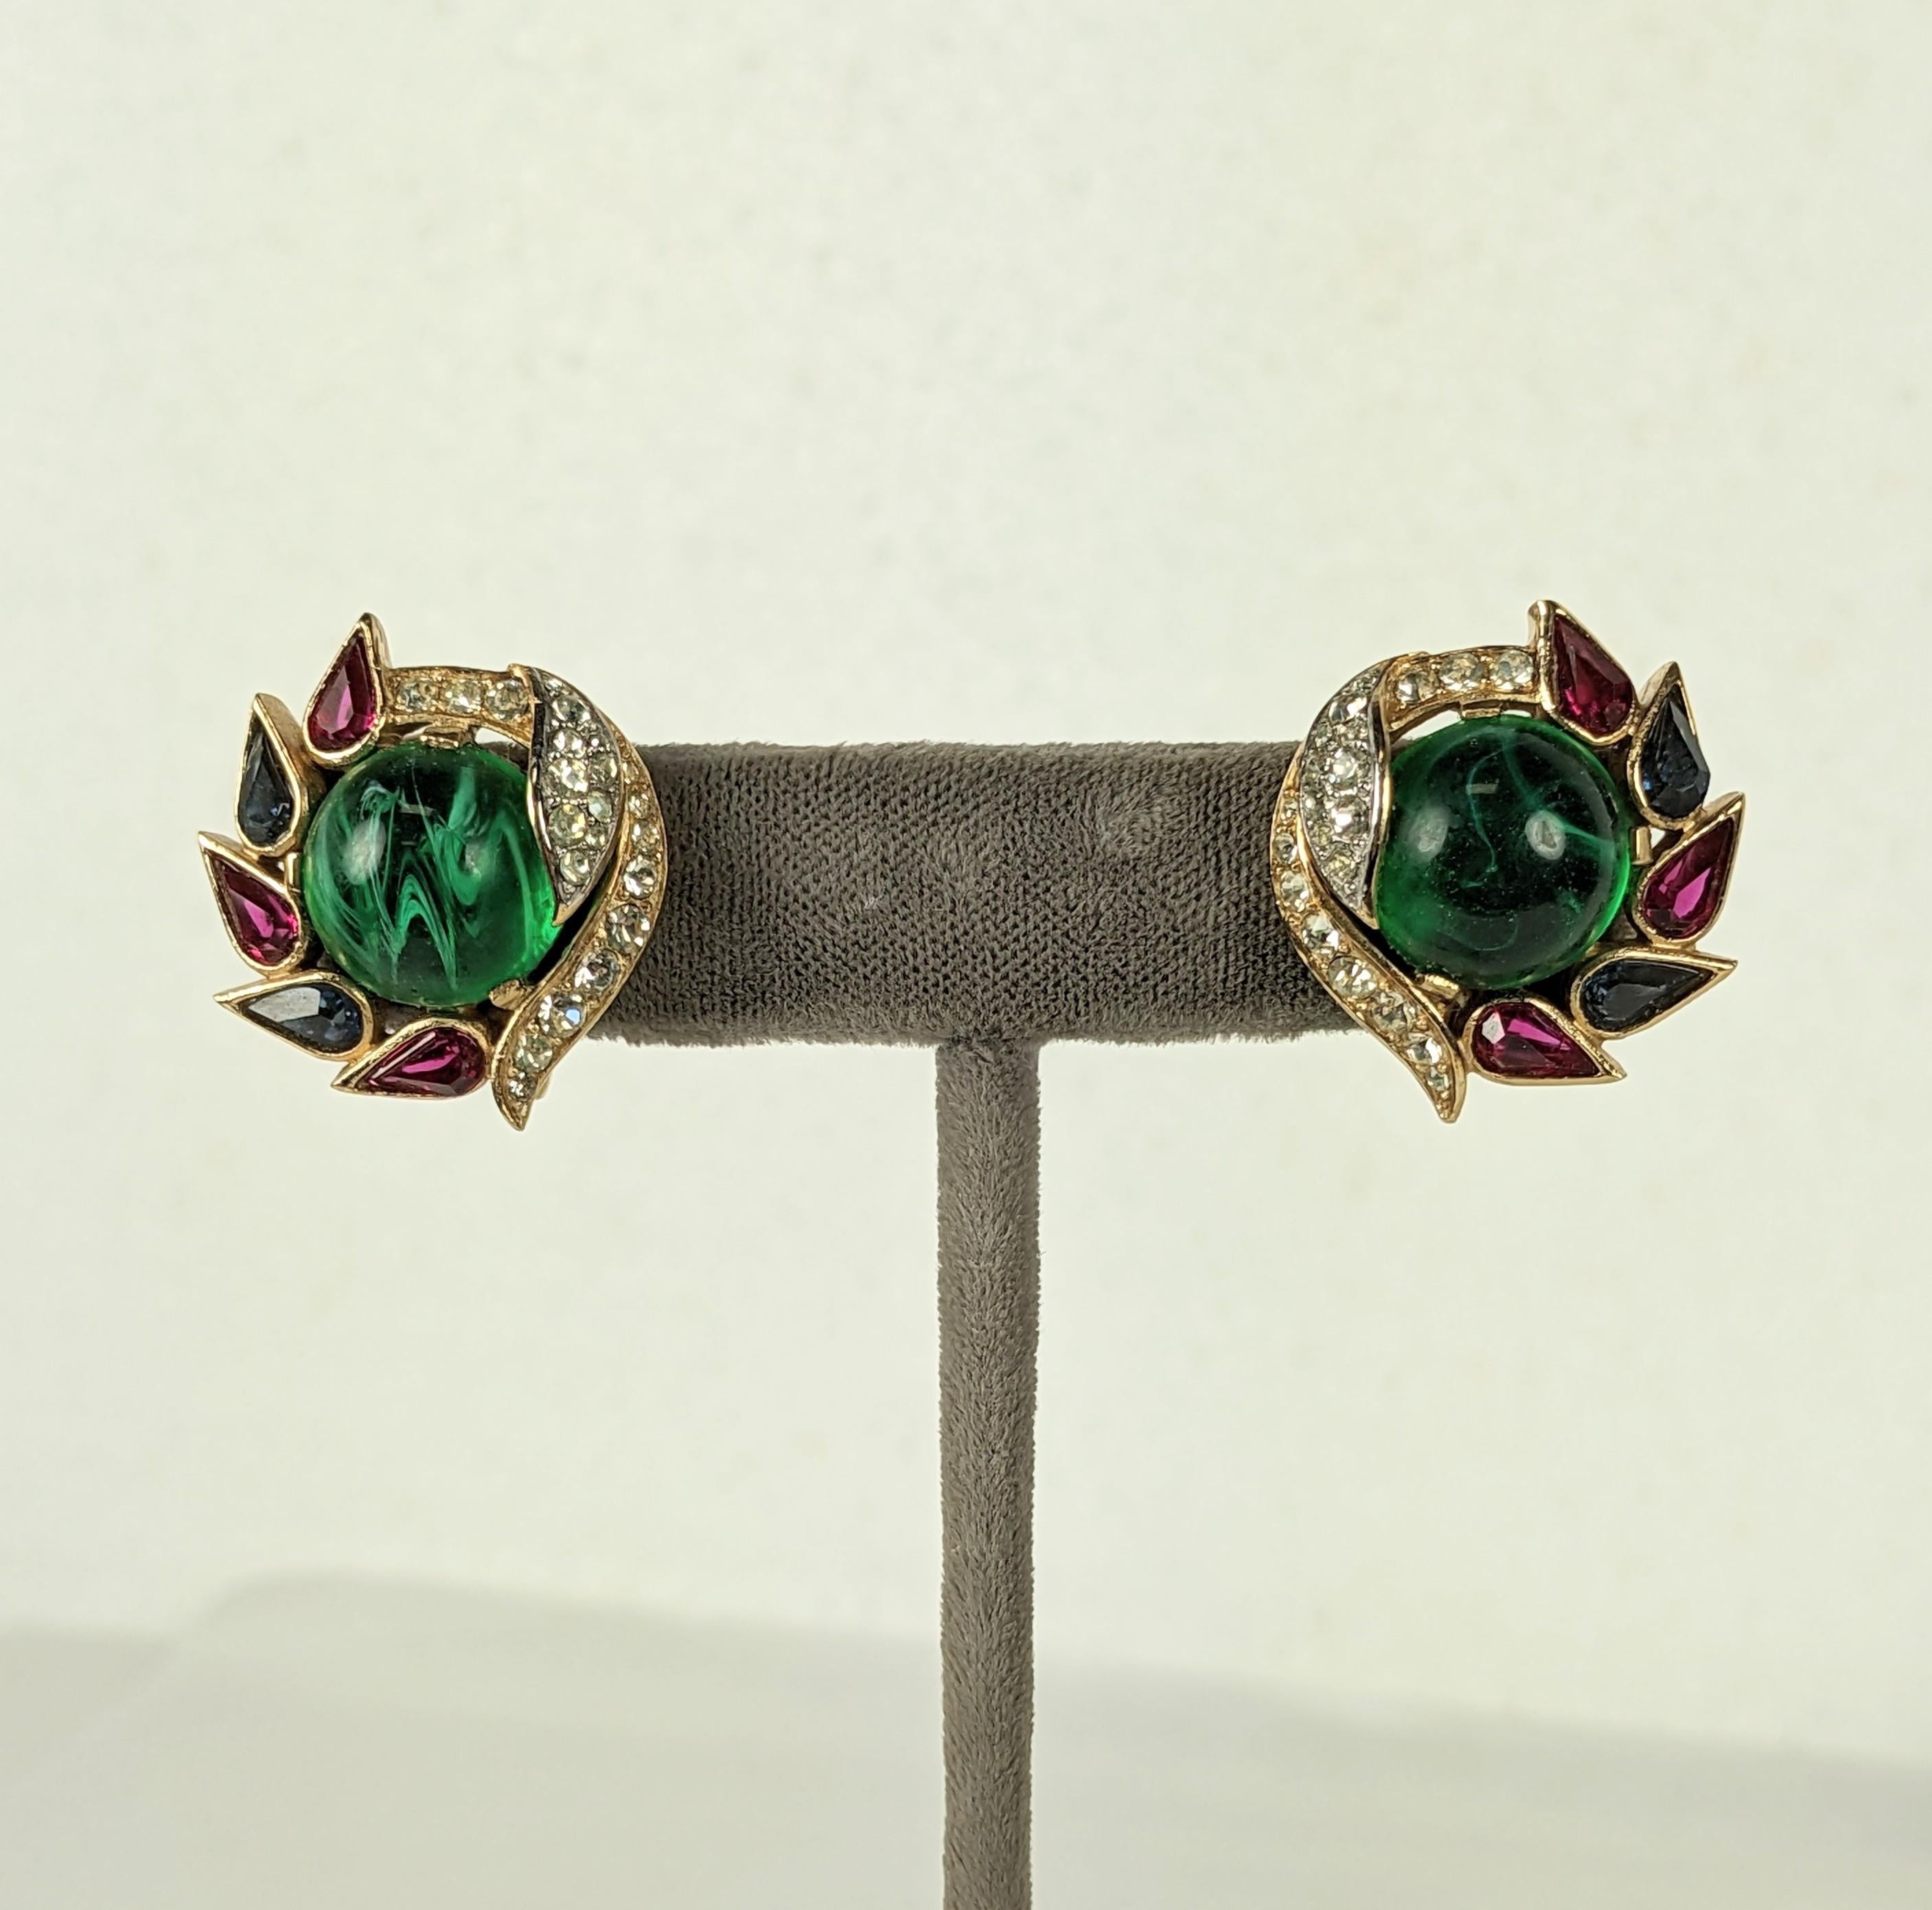 Rare Trifari Jewels of India Earrings from the Moghul series. Elaborate pave crystal stone work set in both gilt and rhodium metal with cabochon stones in jewel tones.
1960's USA.  1